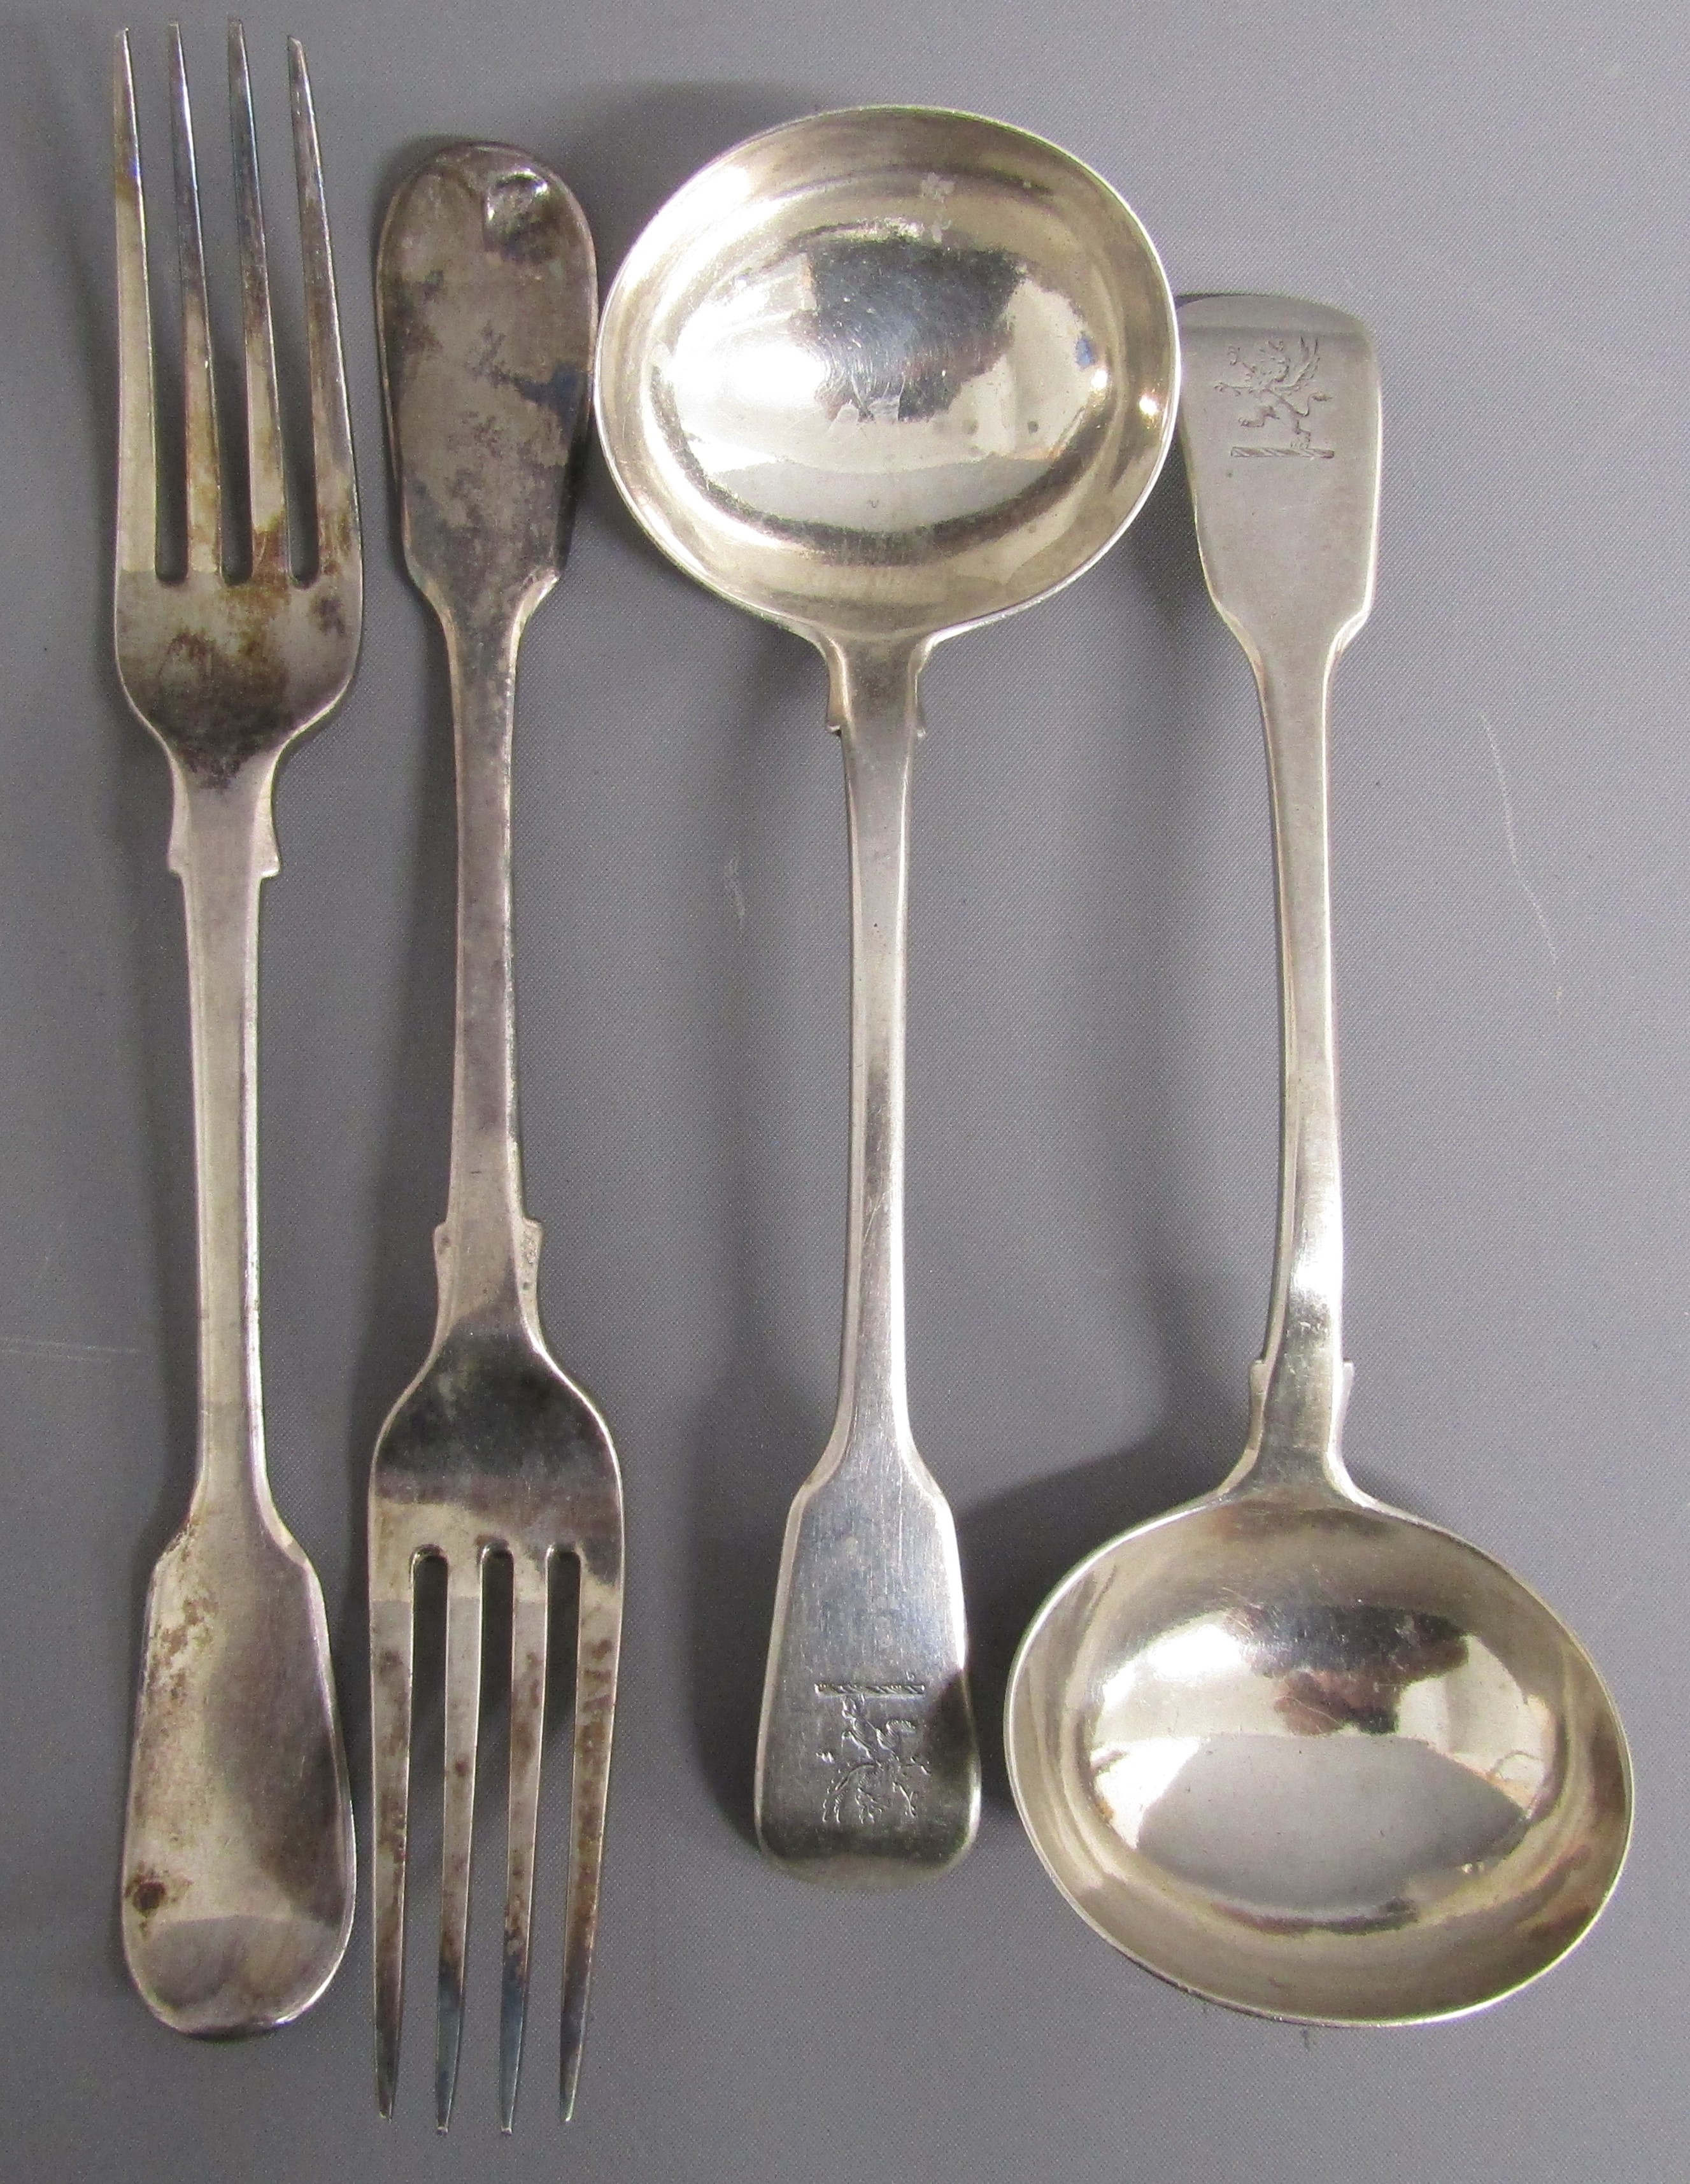 2 silver forks and 2 ladles, William Cripps London 1825 -  - total weight 8.8 ozt